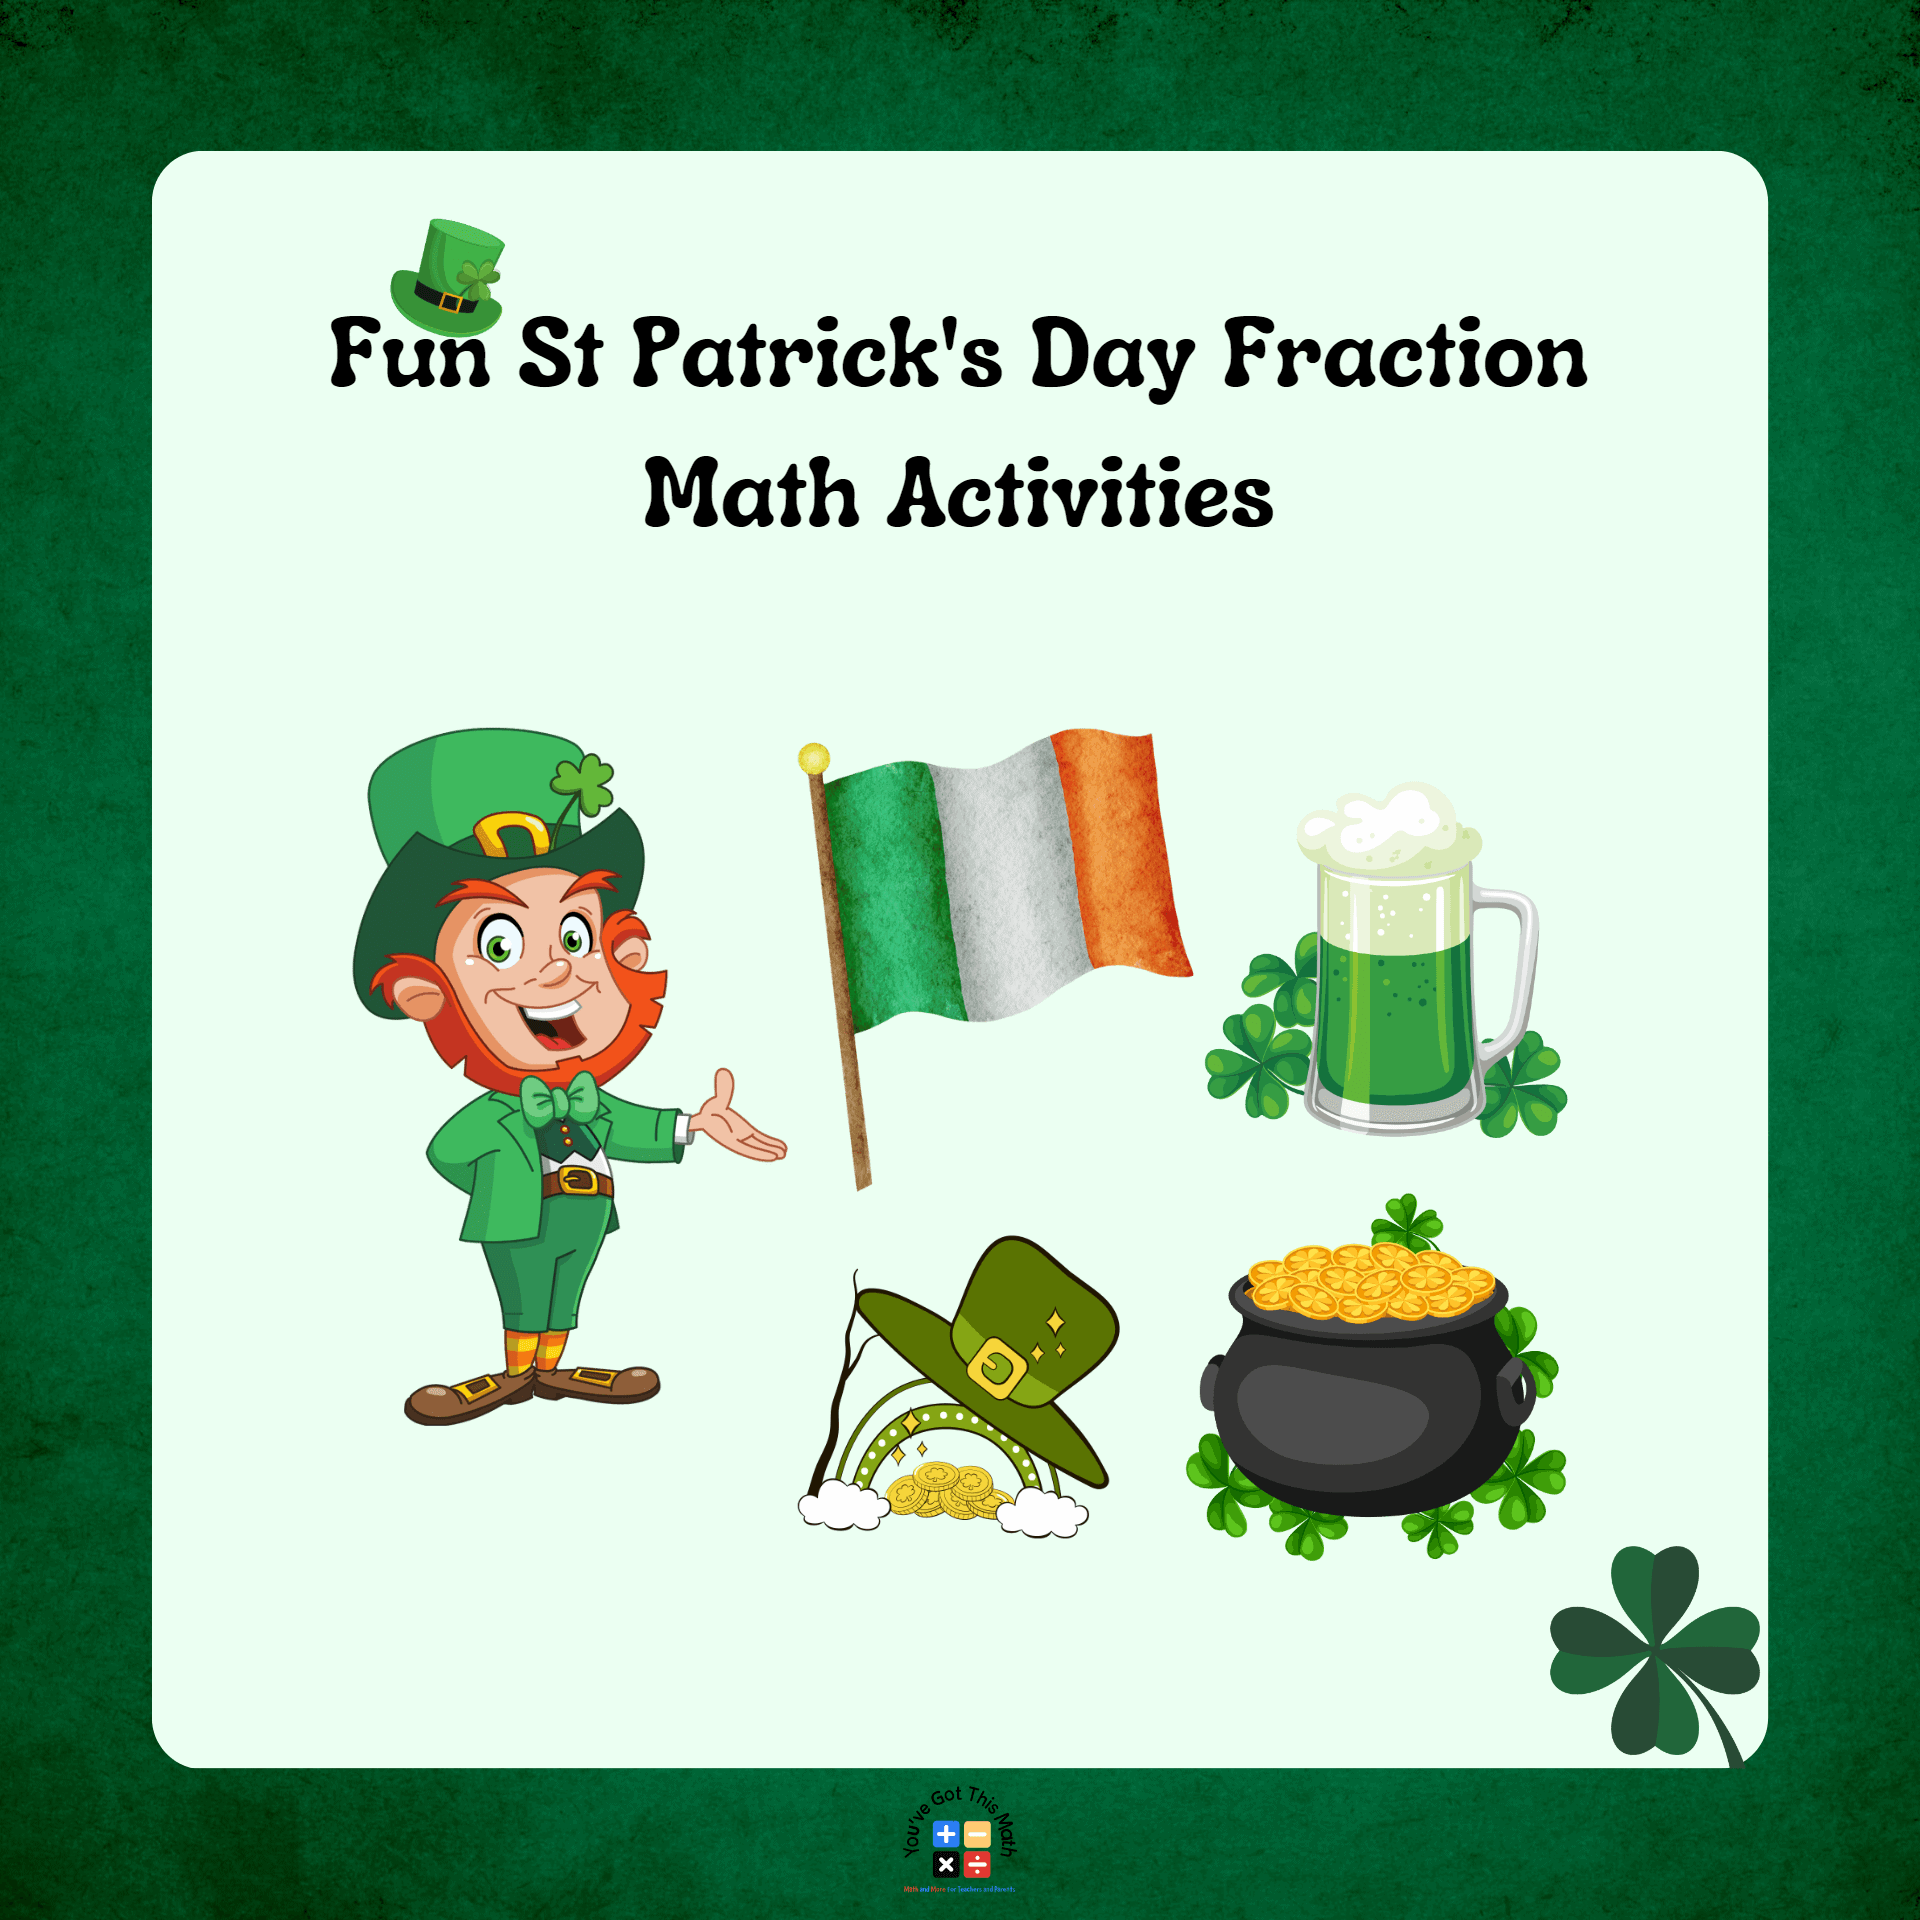 using fraction to describe St Patrick's Day Fraction Math